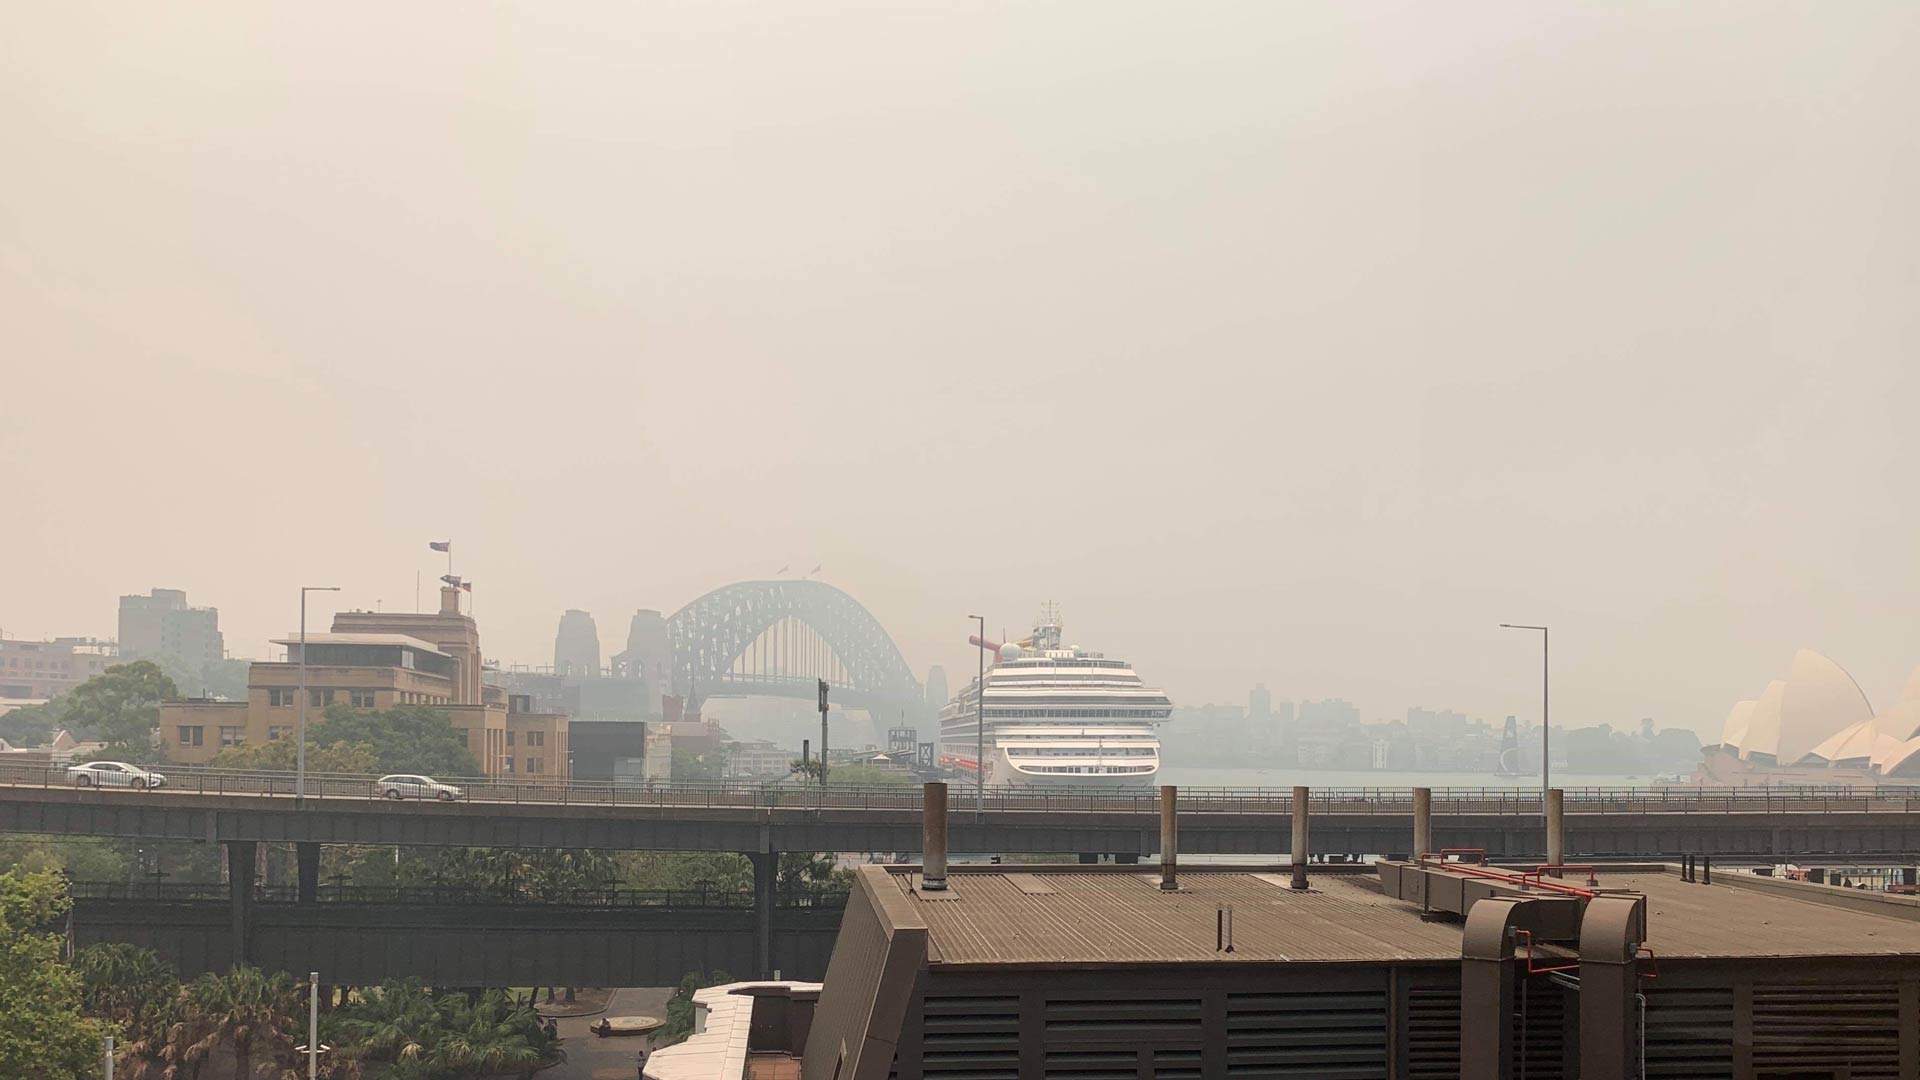 All Sydney Ferries Have Been Cancelled Because of the Bushfire Smoke